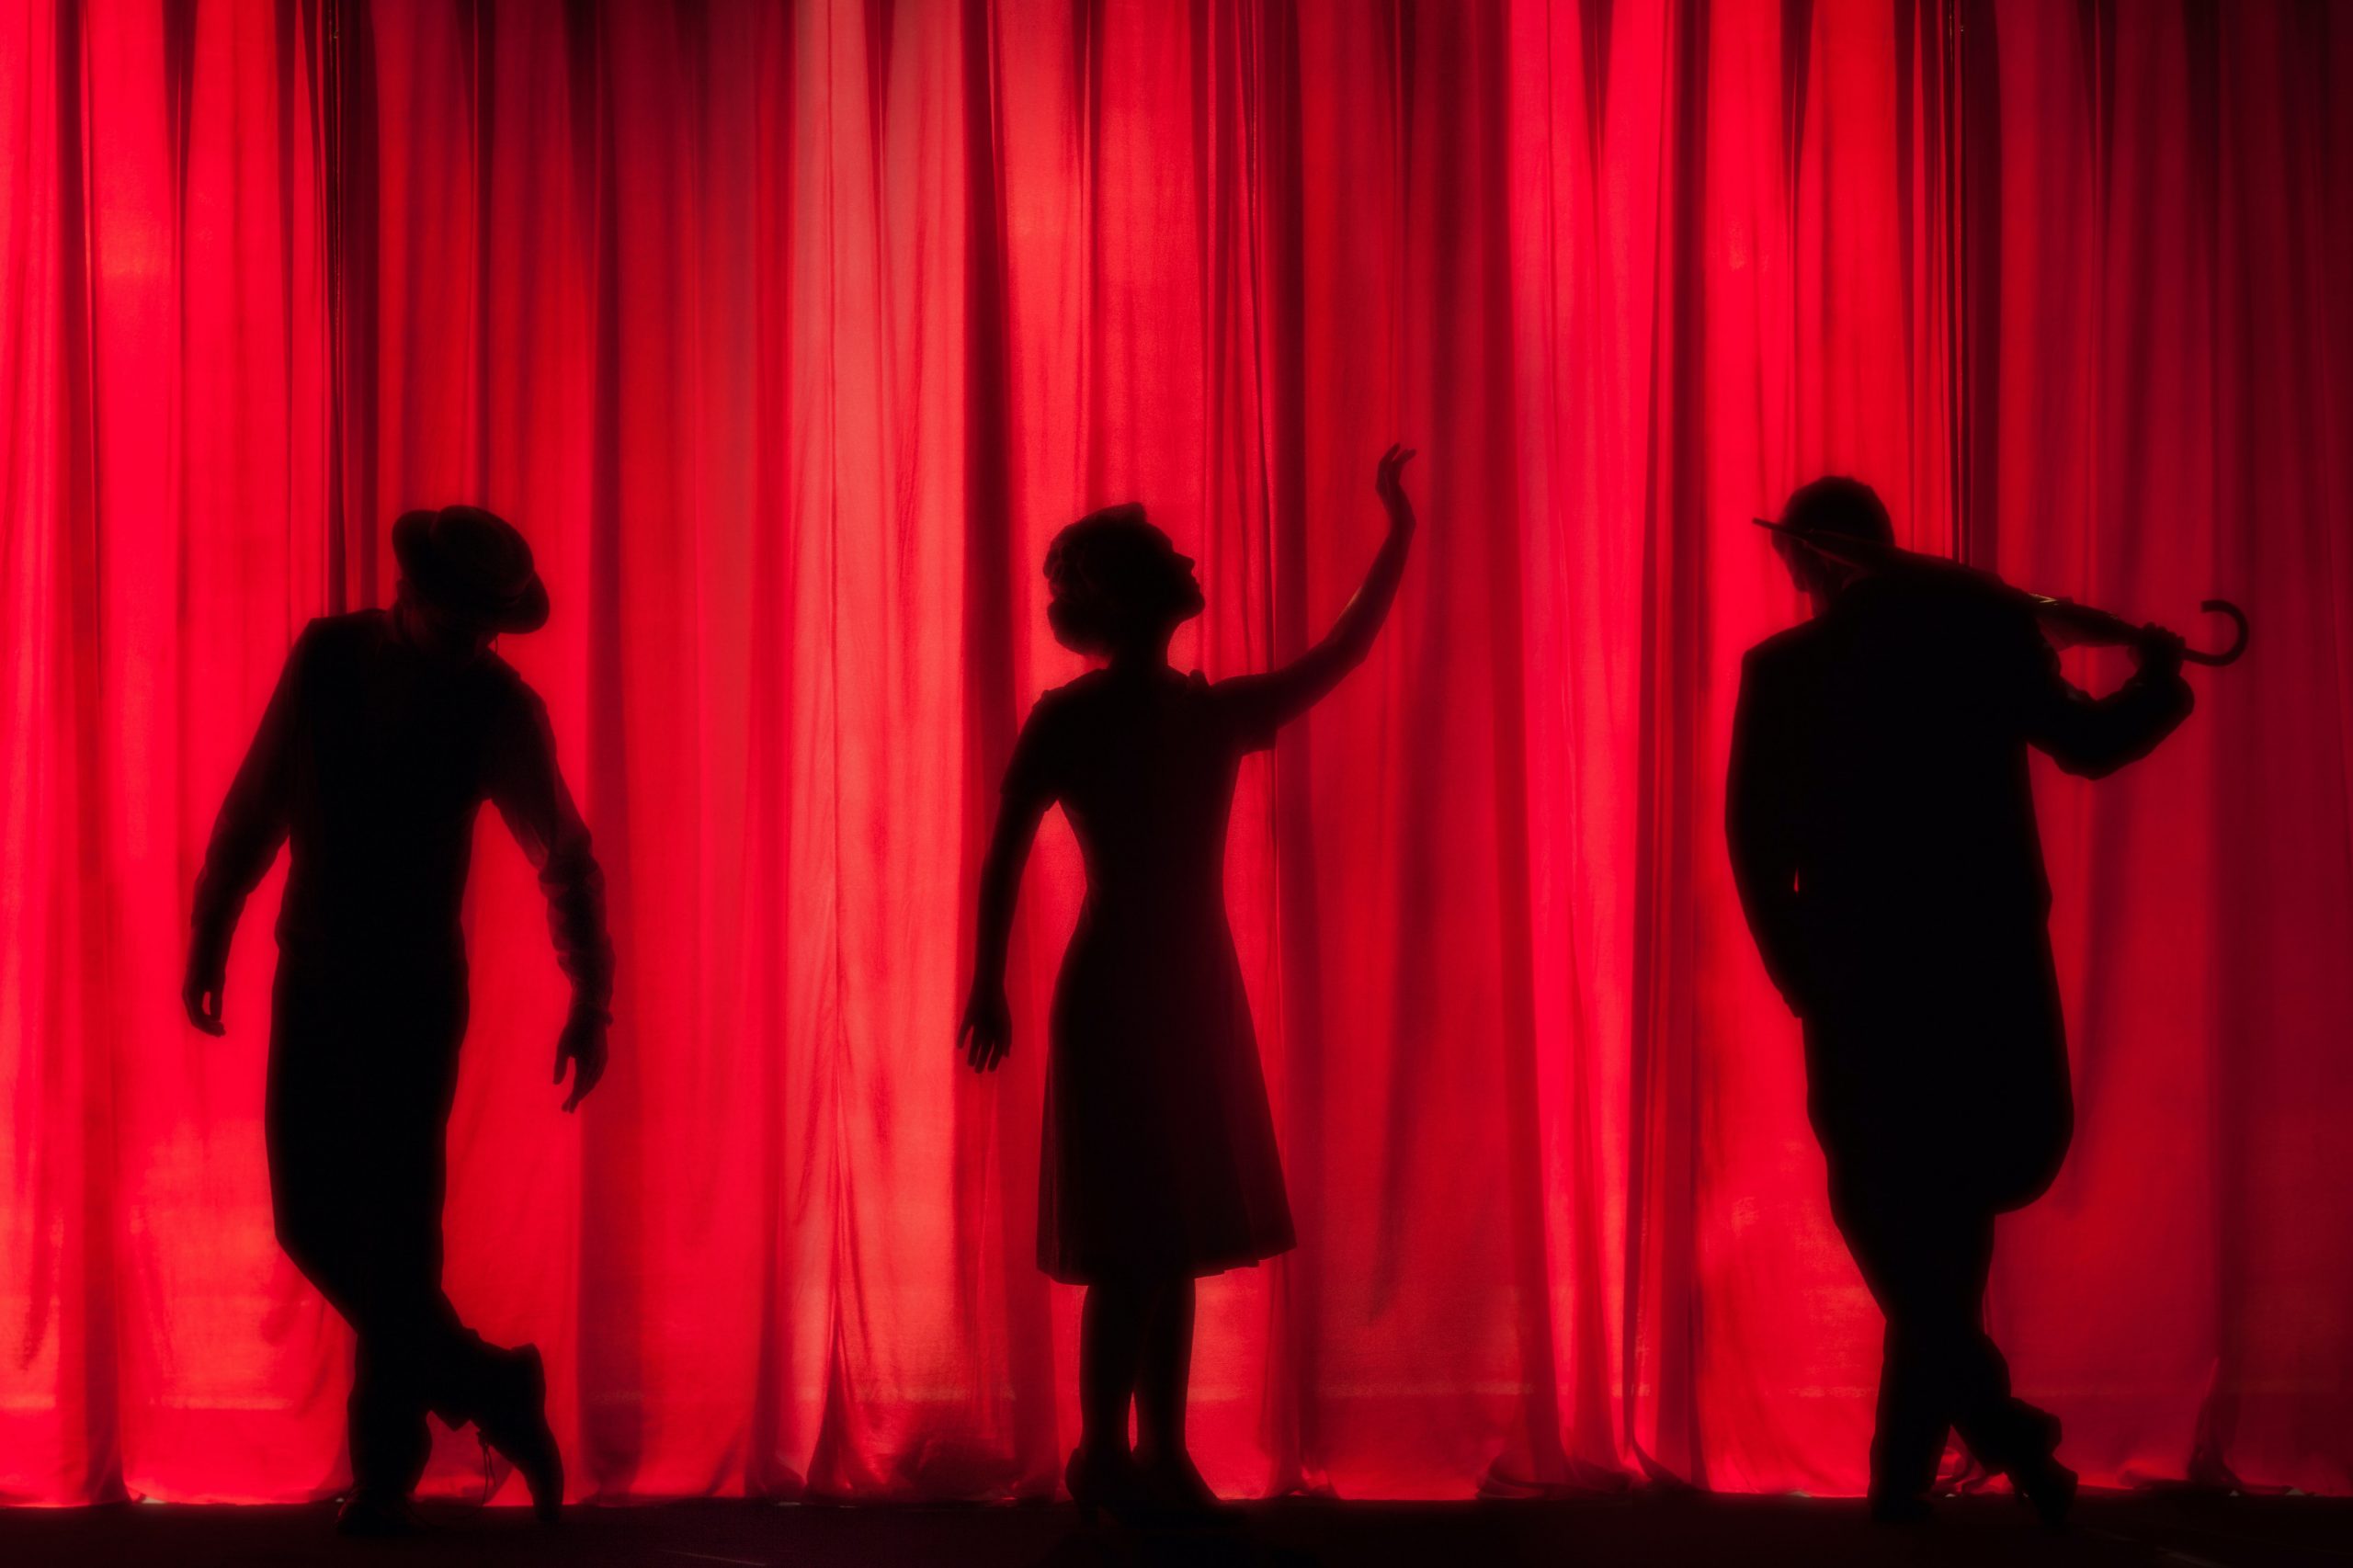 Three silhouettes standing on stage.